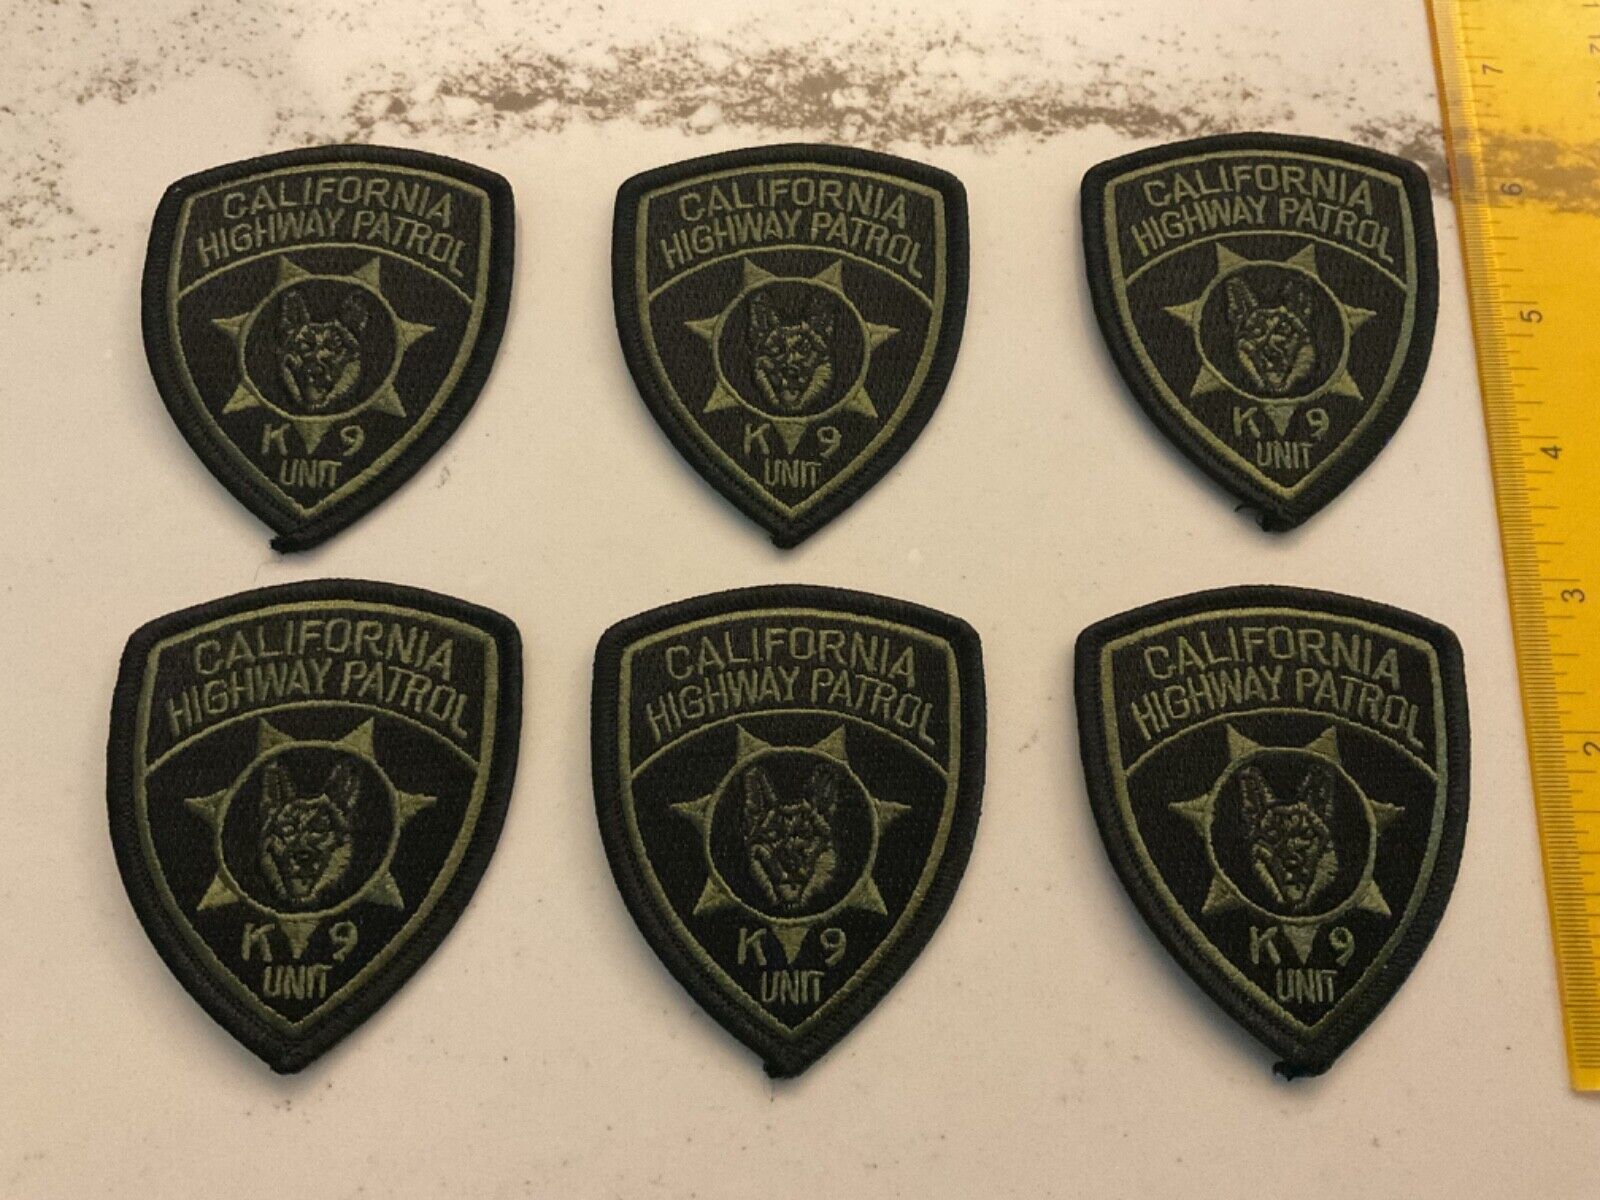 California Highway Patrol K-9 Subdued Hat patch set 6 pieces all new